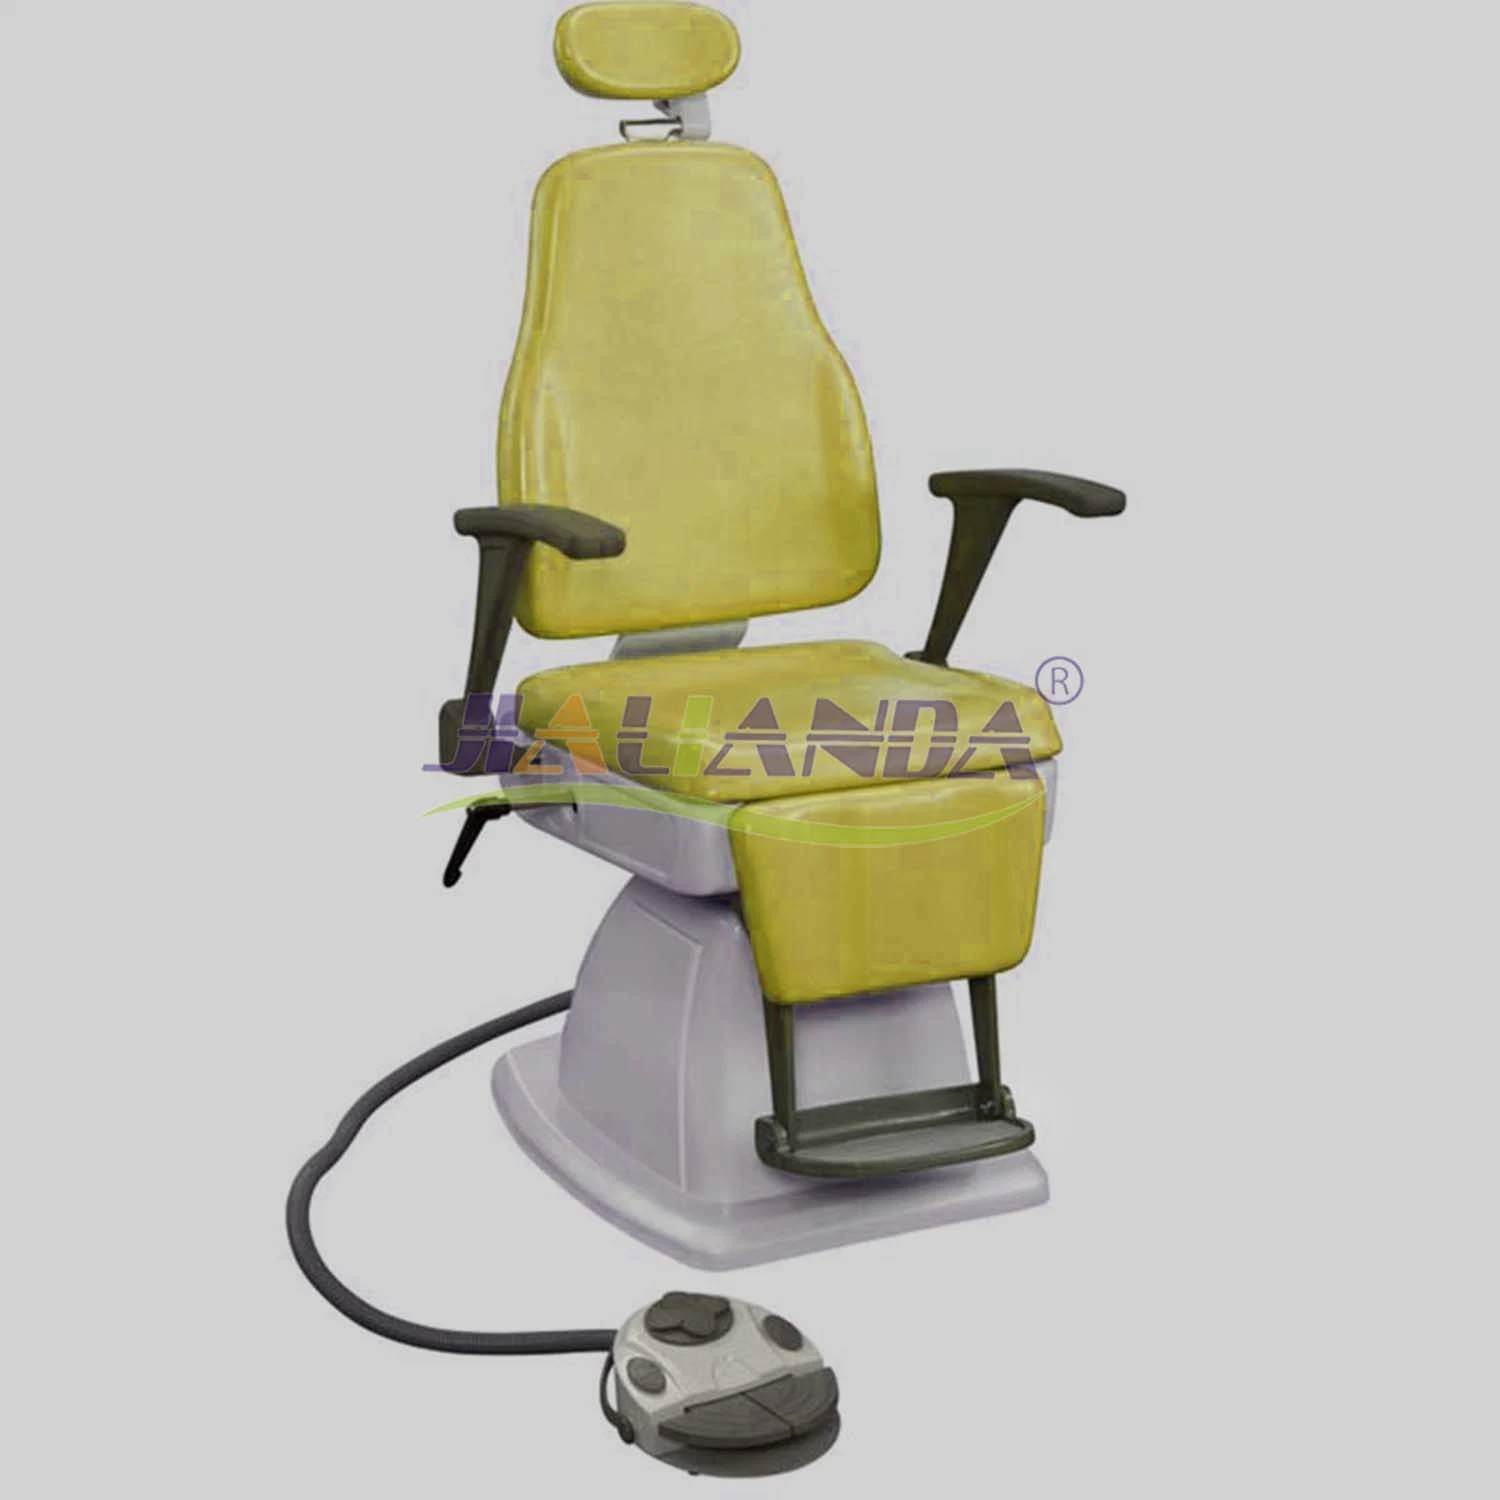 Hospital Furniture Electric Patient Chair